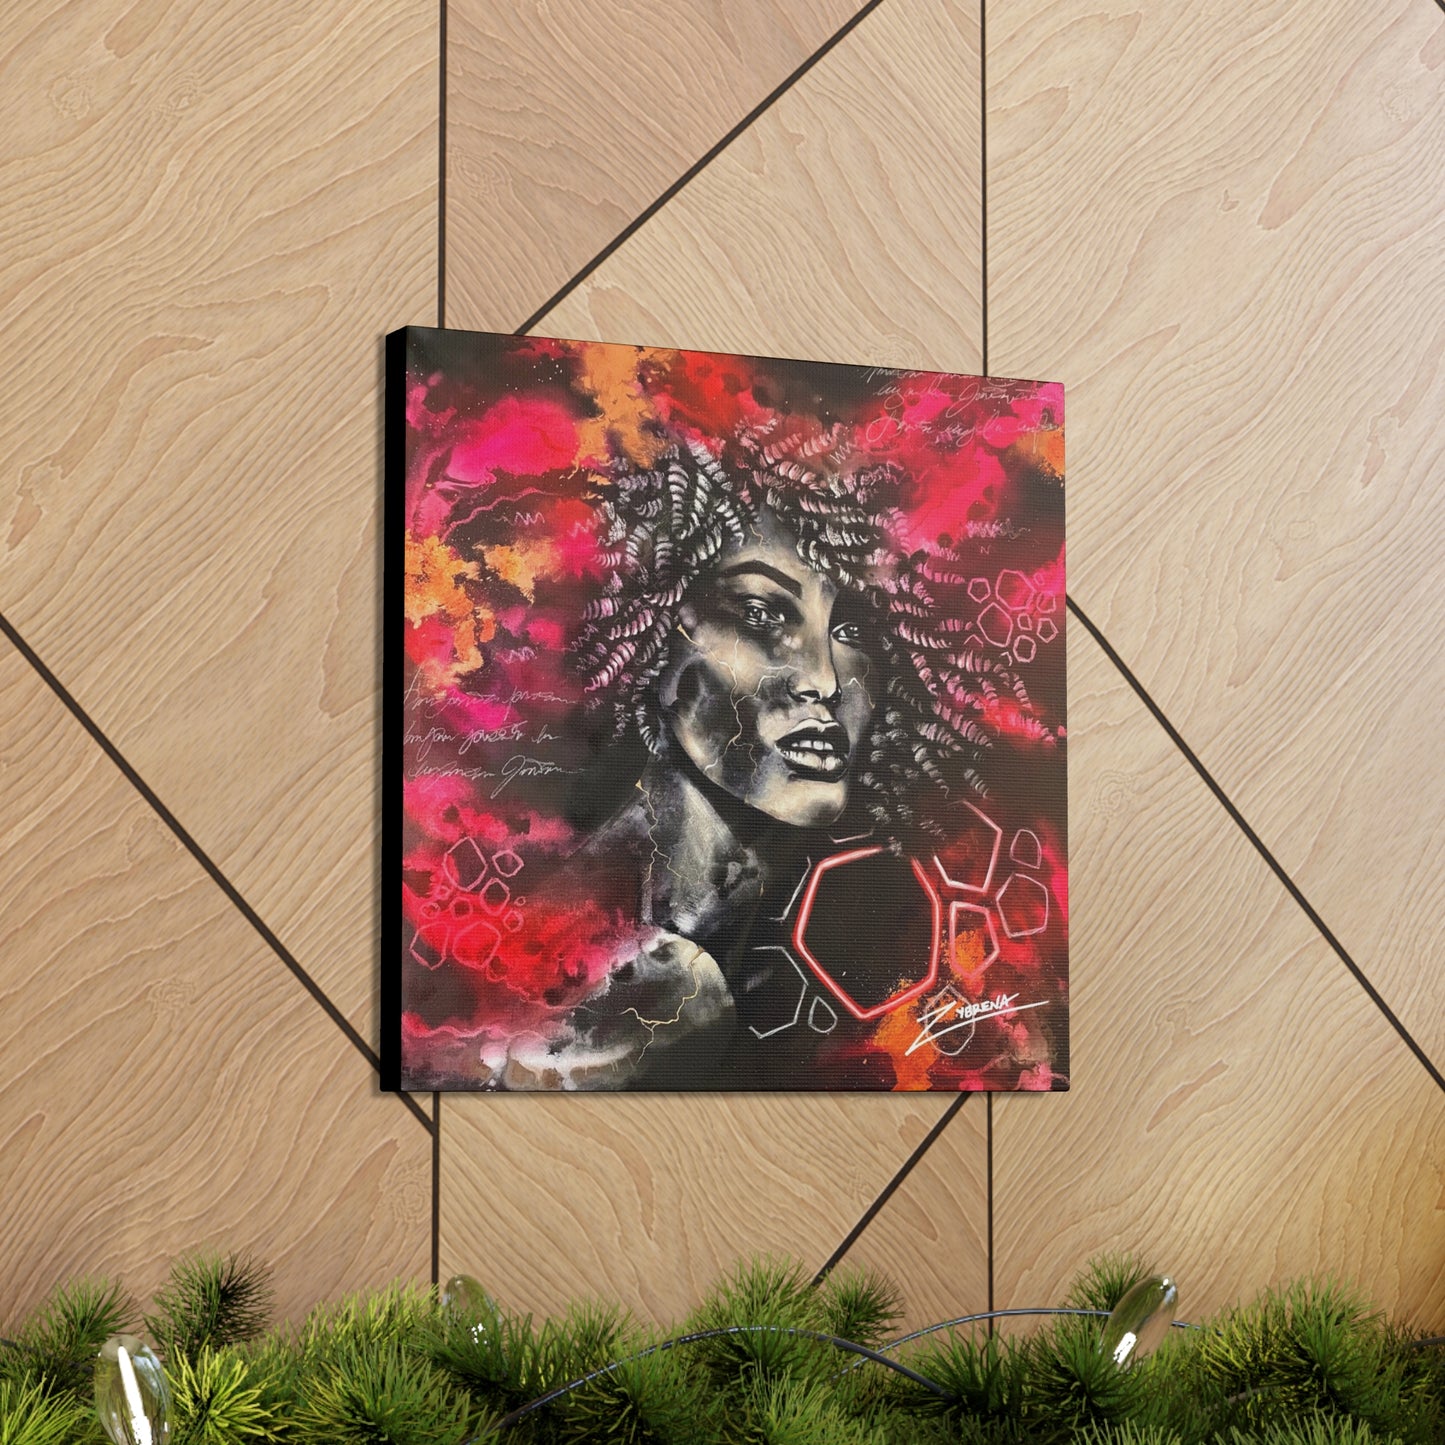 RE:Made (Vol. I) Canvas Gallery Wrapped Print